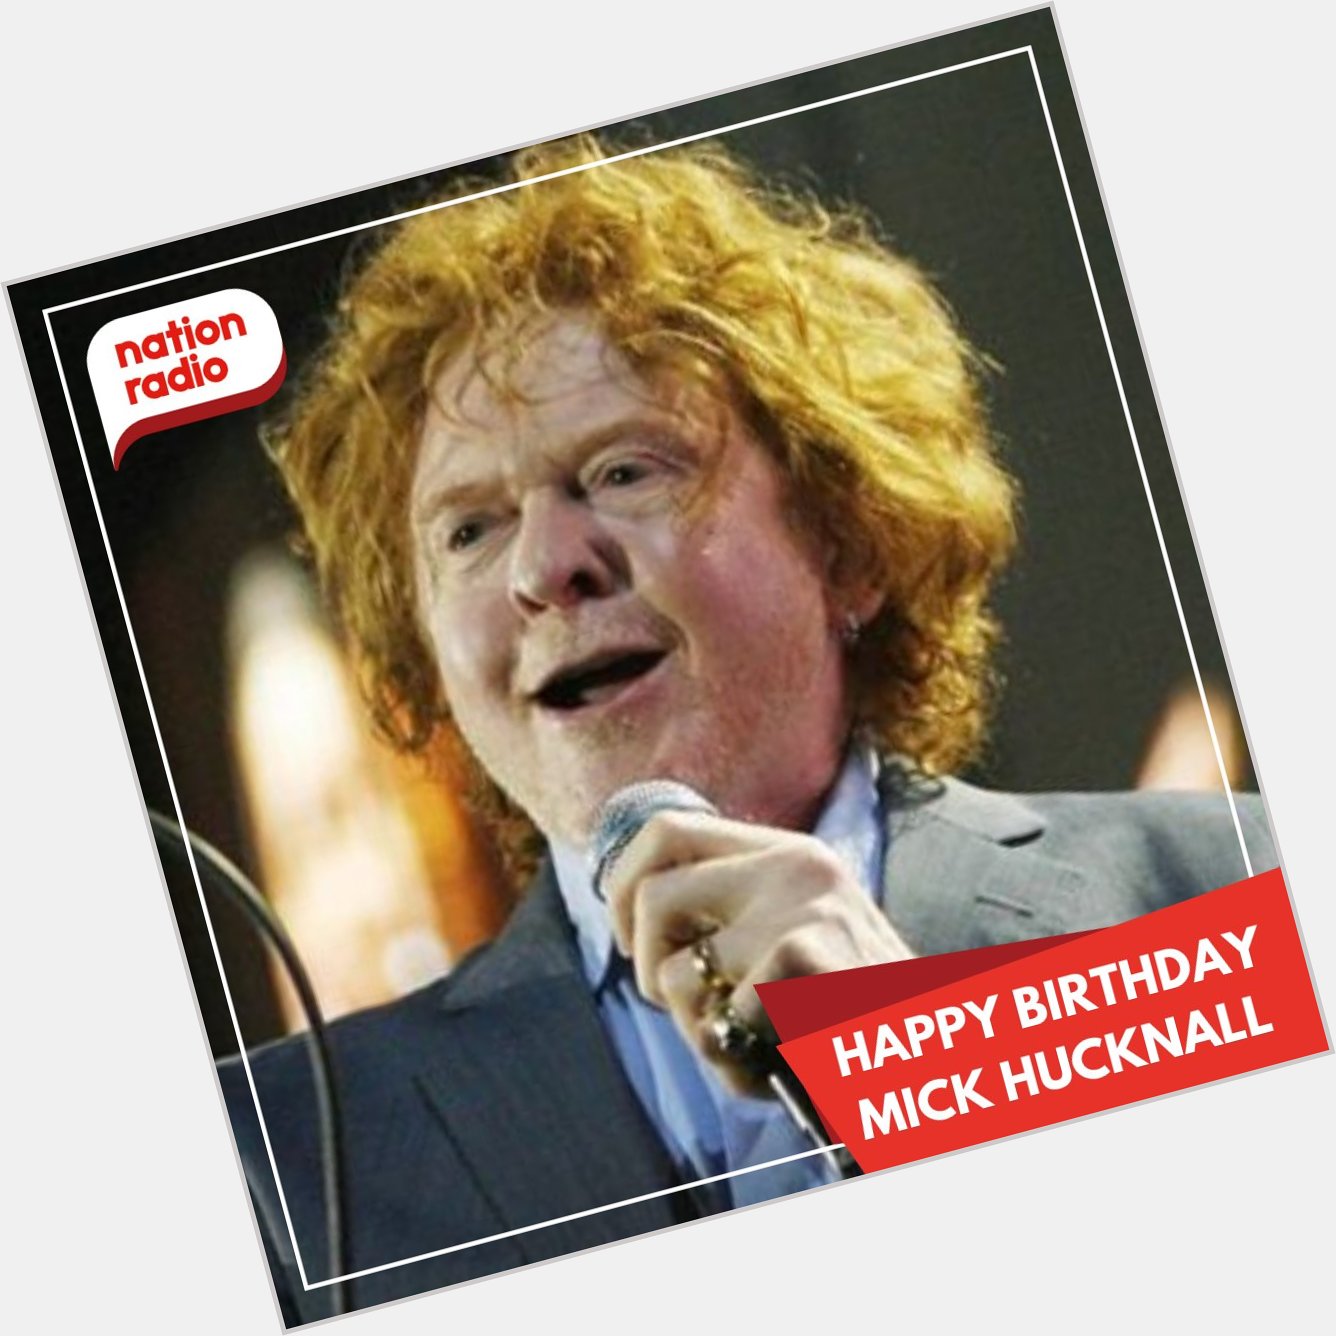 Happy 60th birthday Mick Hucknall! What\s your favourite Simply Red track? 